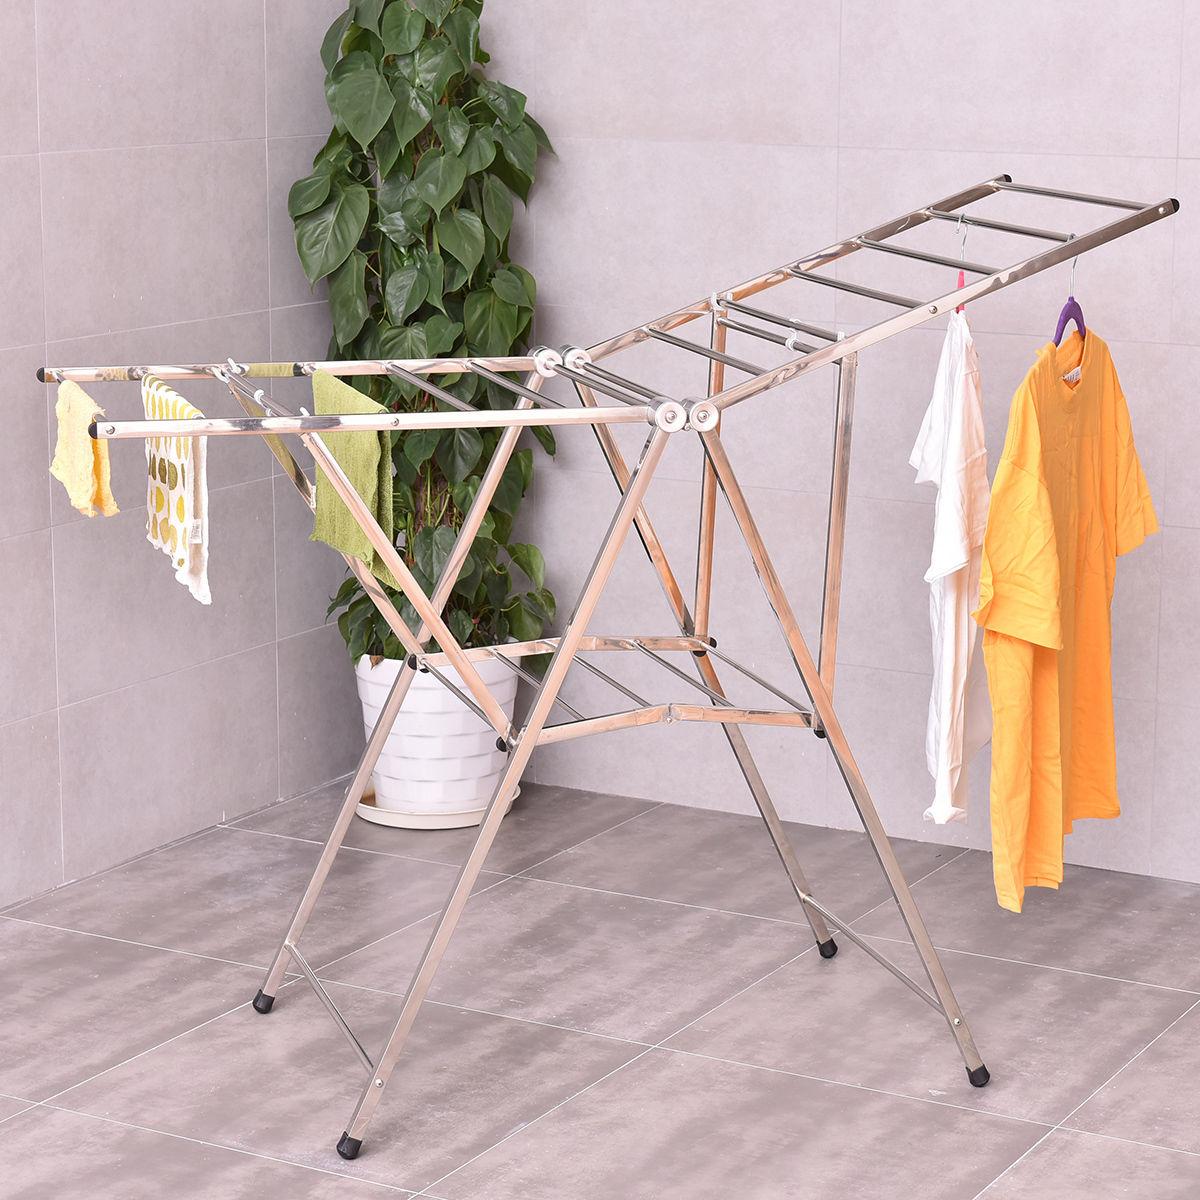 Foldable Clothes Drying Rack Price in Sri Lanka | Quickee